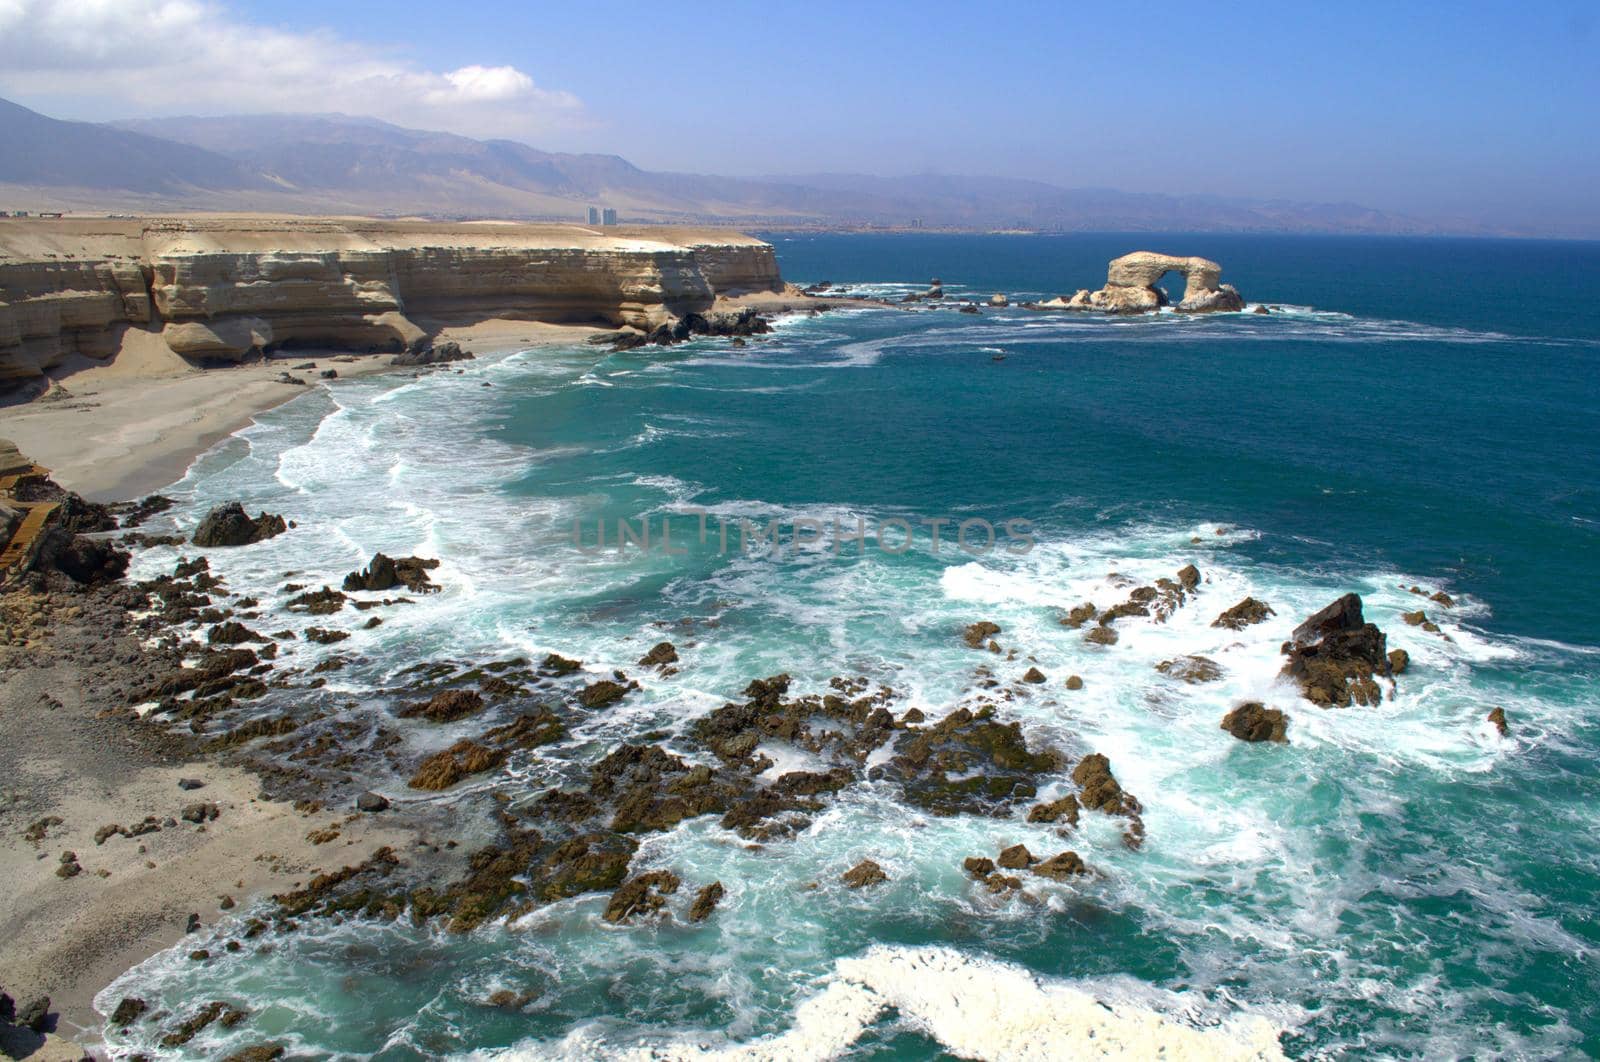 Natural rock formation "La Portada" (The Gate) in Antofagasta, Chile. Wide angle view. by hernan_hyper